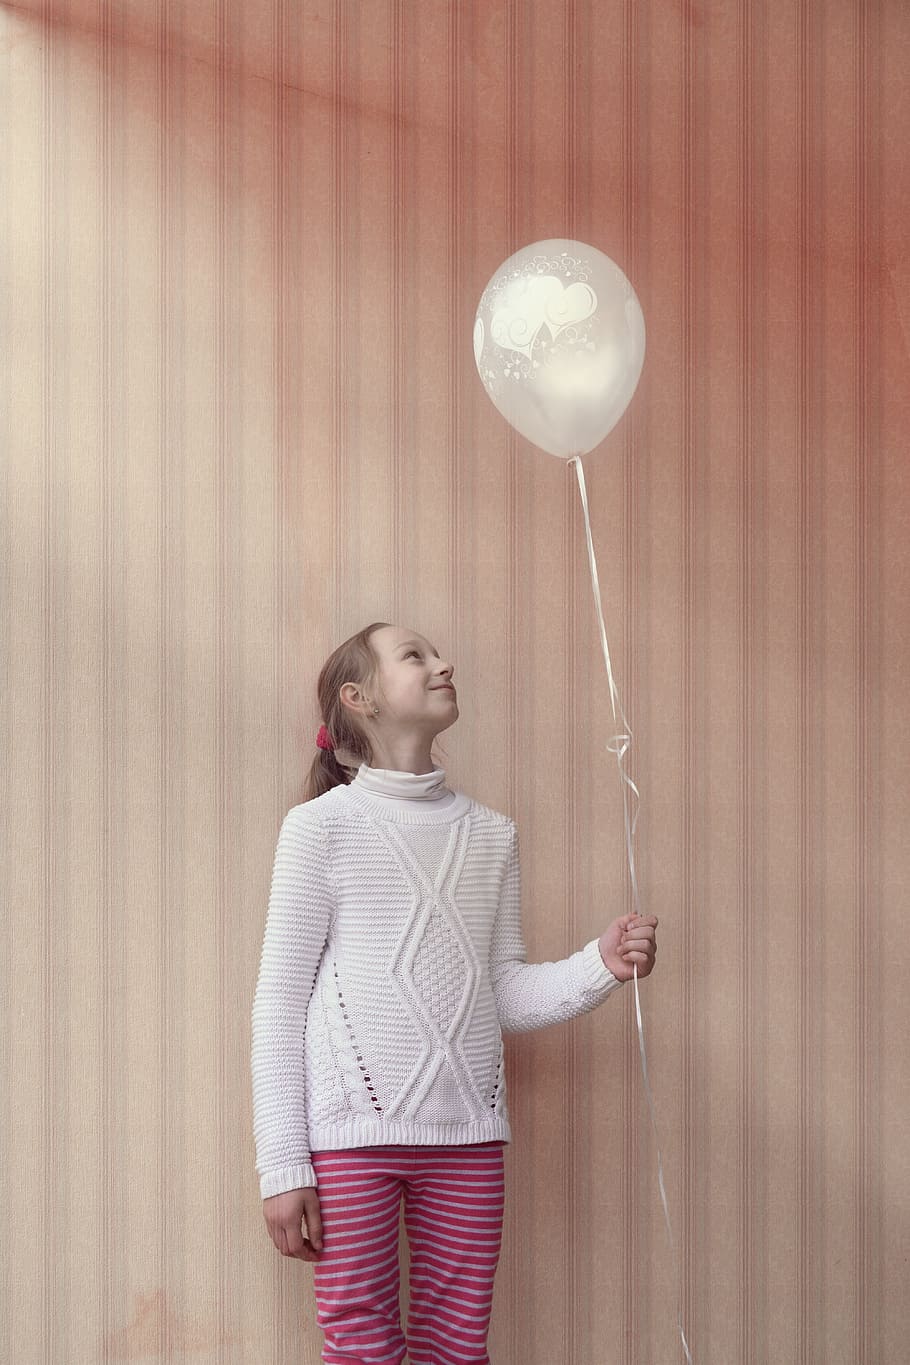 girl, standing, wall, holding, balloon string, balloon, happy, pink, young, party